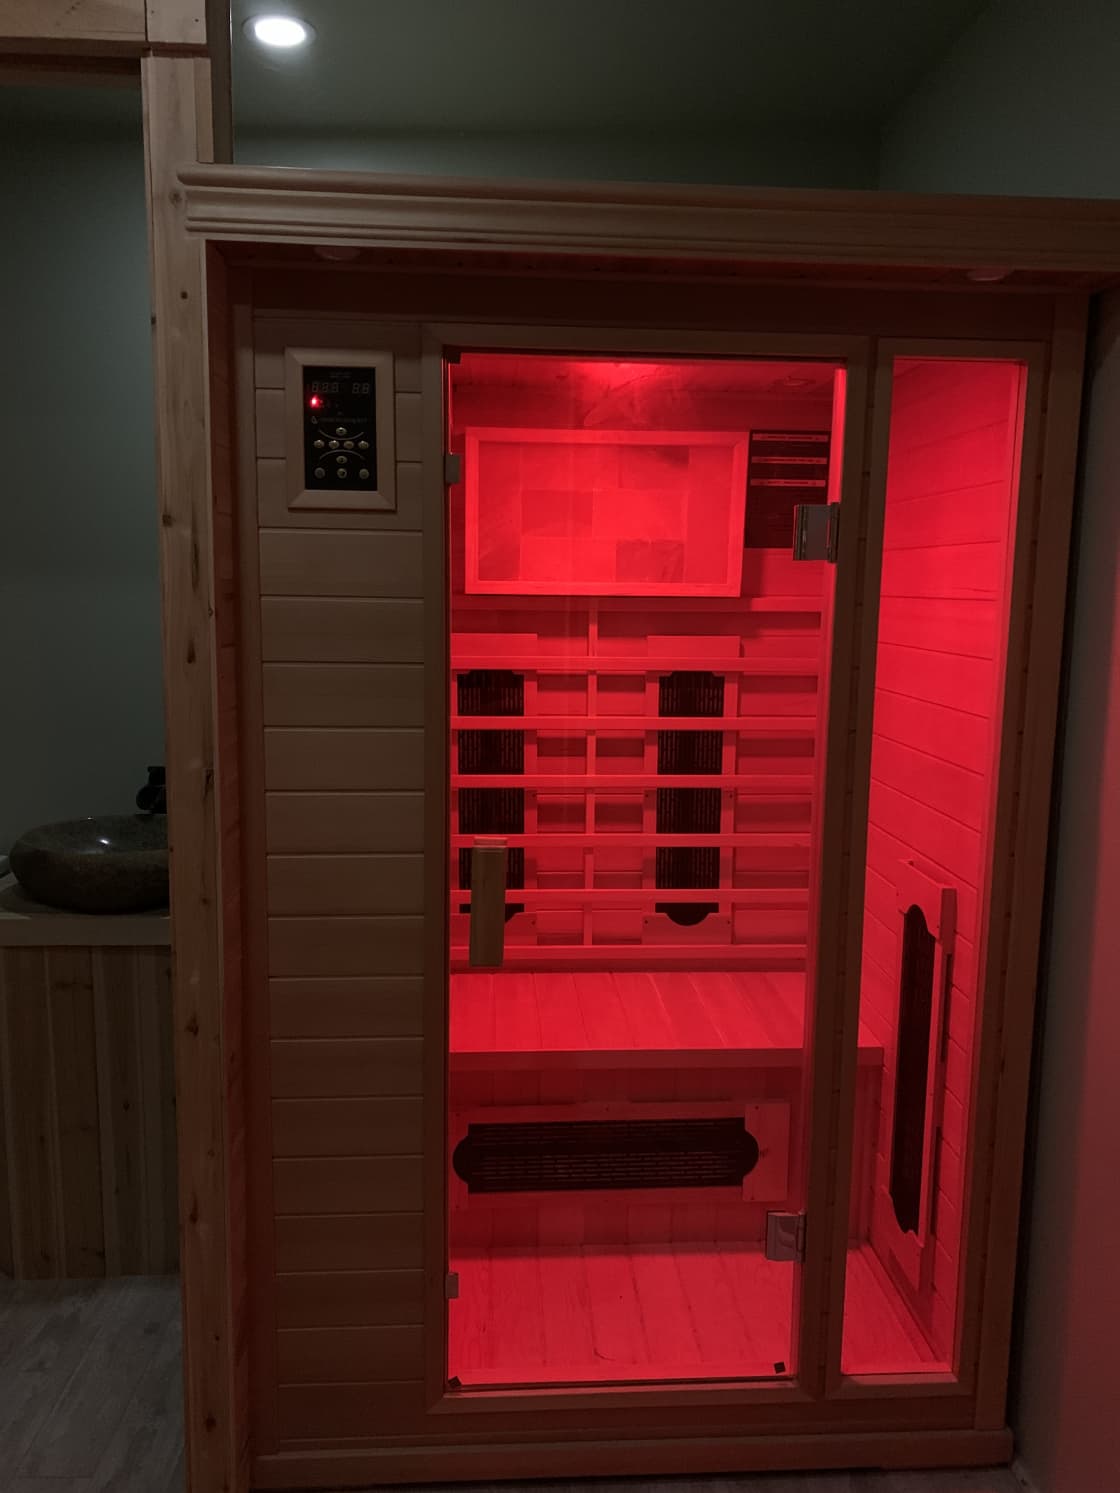 Infrared Himalayan salt sauna available as part of small spa package for additional fee.